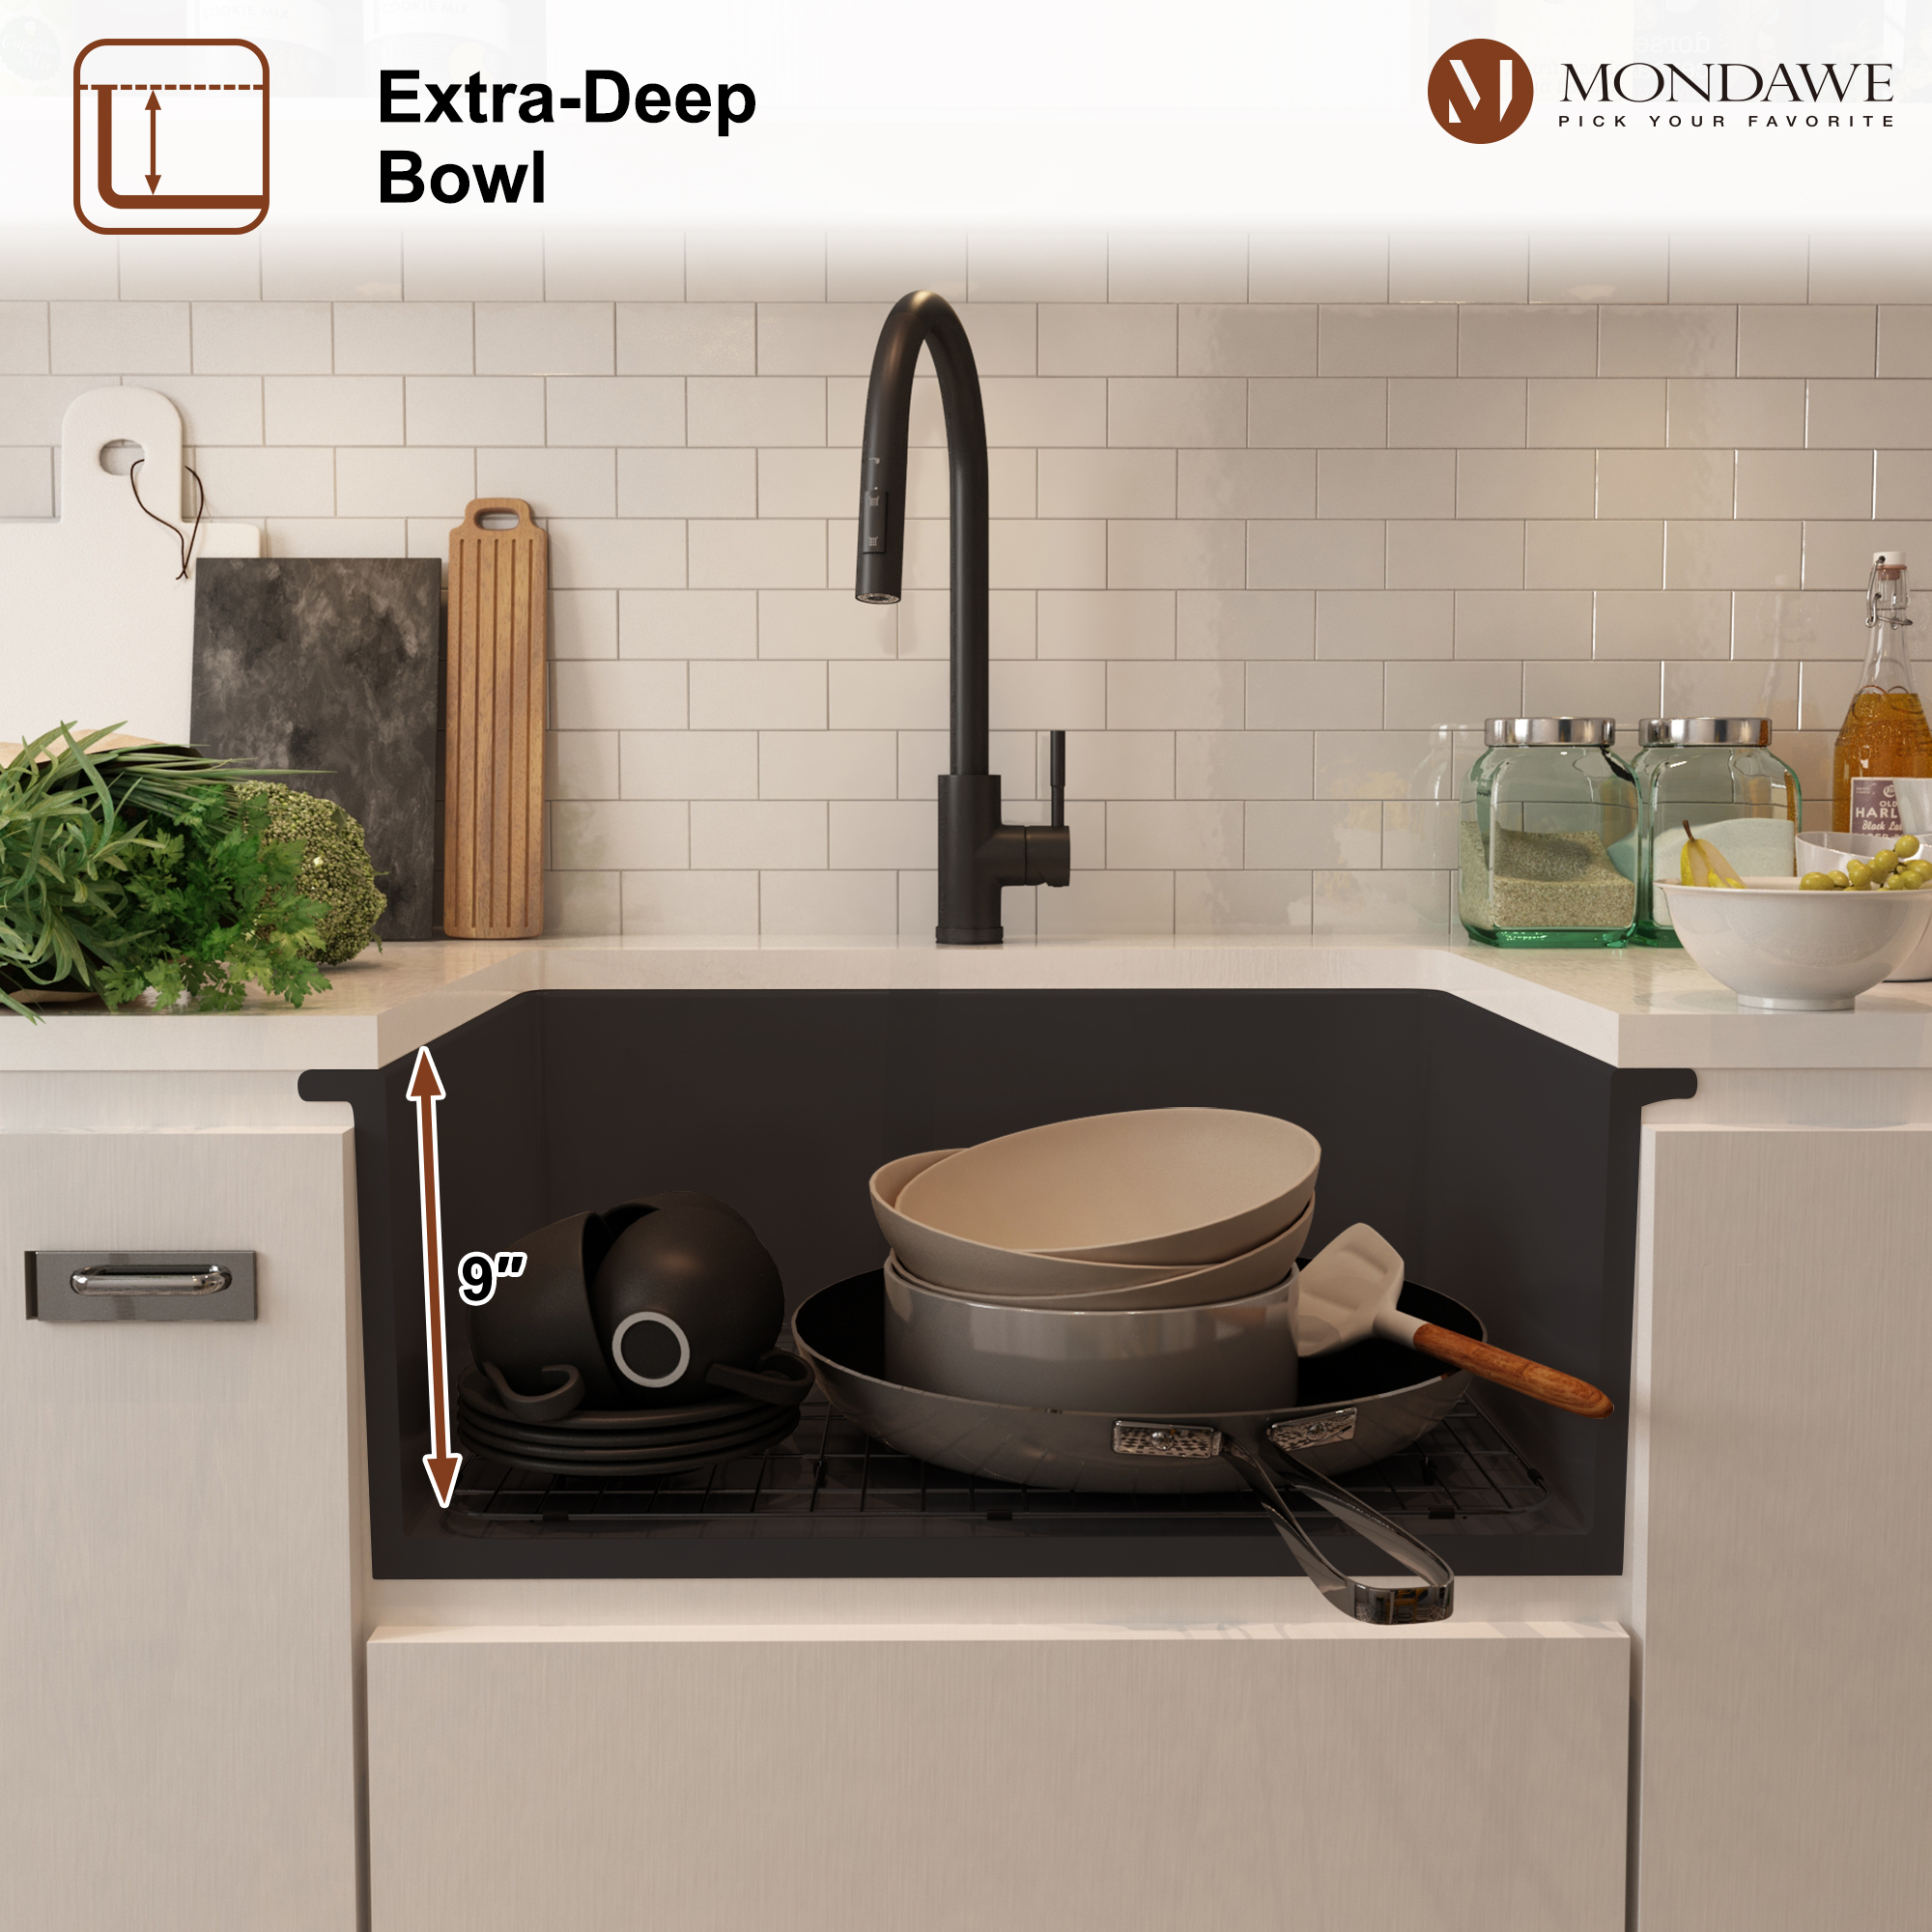 Undermount 27 in. matte black single bowl fireclay kitchen sink comes with pull-down faucet-Mondawe